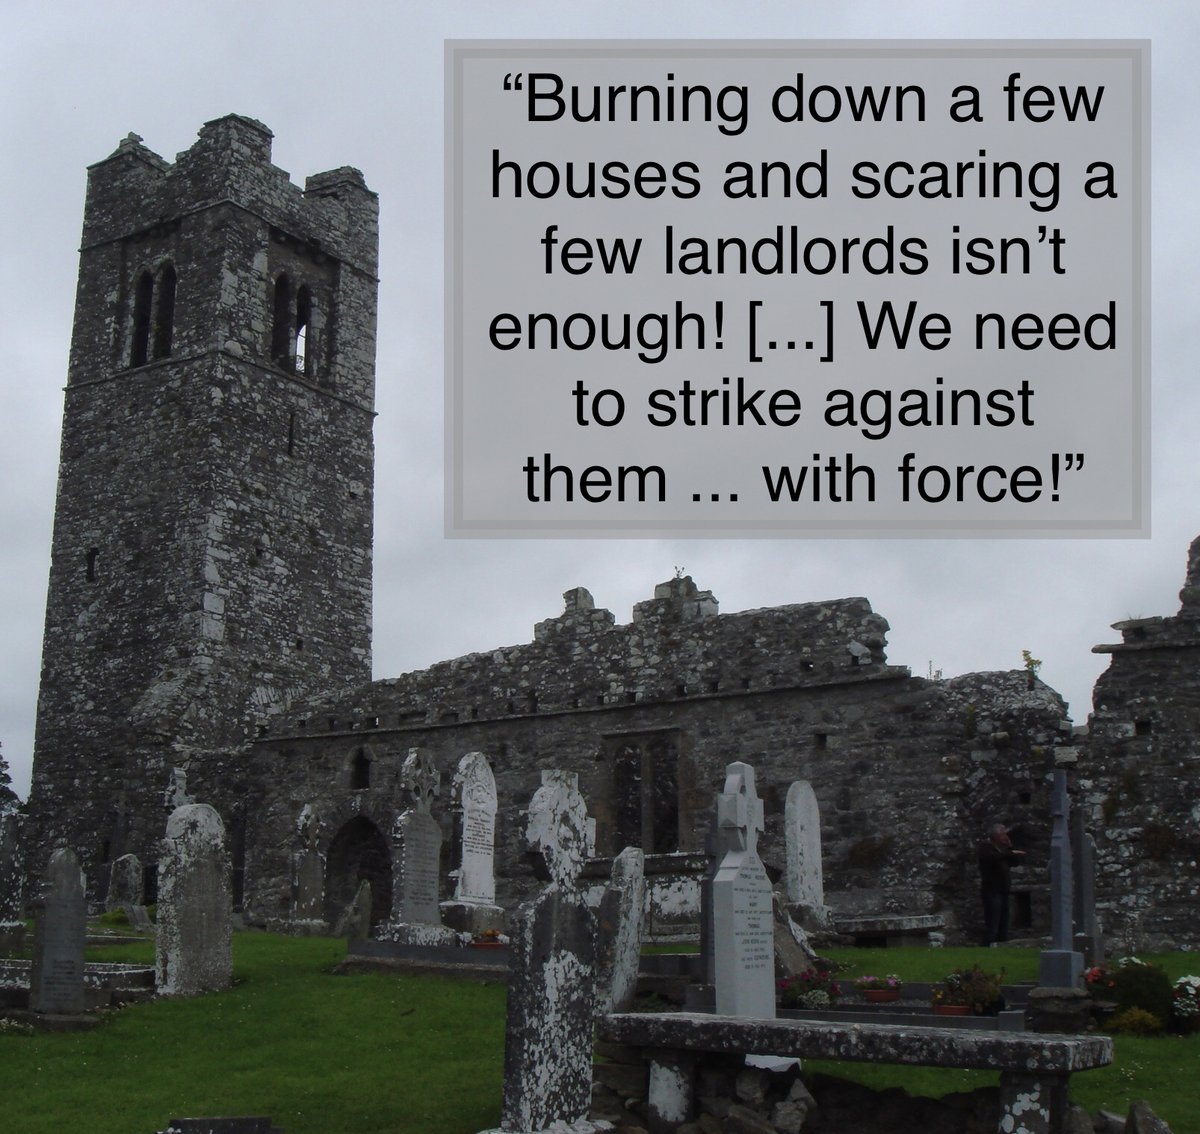 Is there a #rebellion brewing in #Ireland in 1843? 

19th century #historicalFiction, on the eve of the #GreatFamine…

lnk.bio/ZeRo

#99cents #KindleUnlimited #IrishHistory #series #HistoricalRomance #HistFic #Romance #betrayal